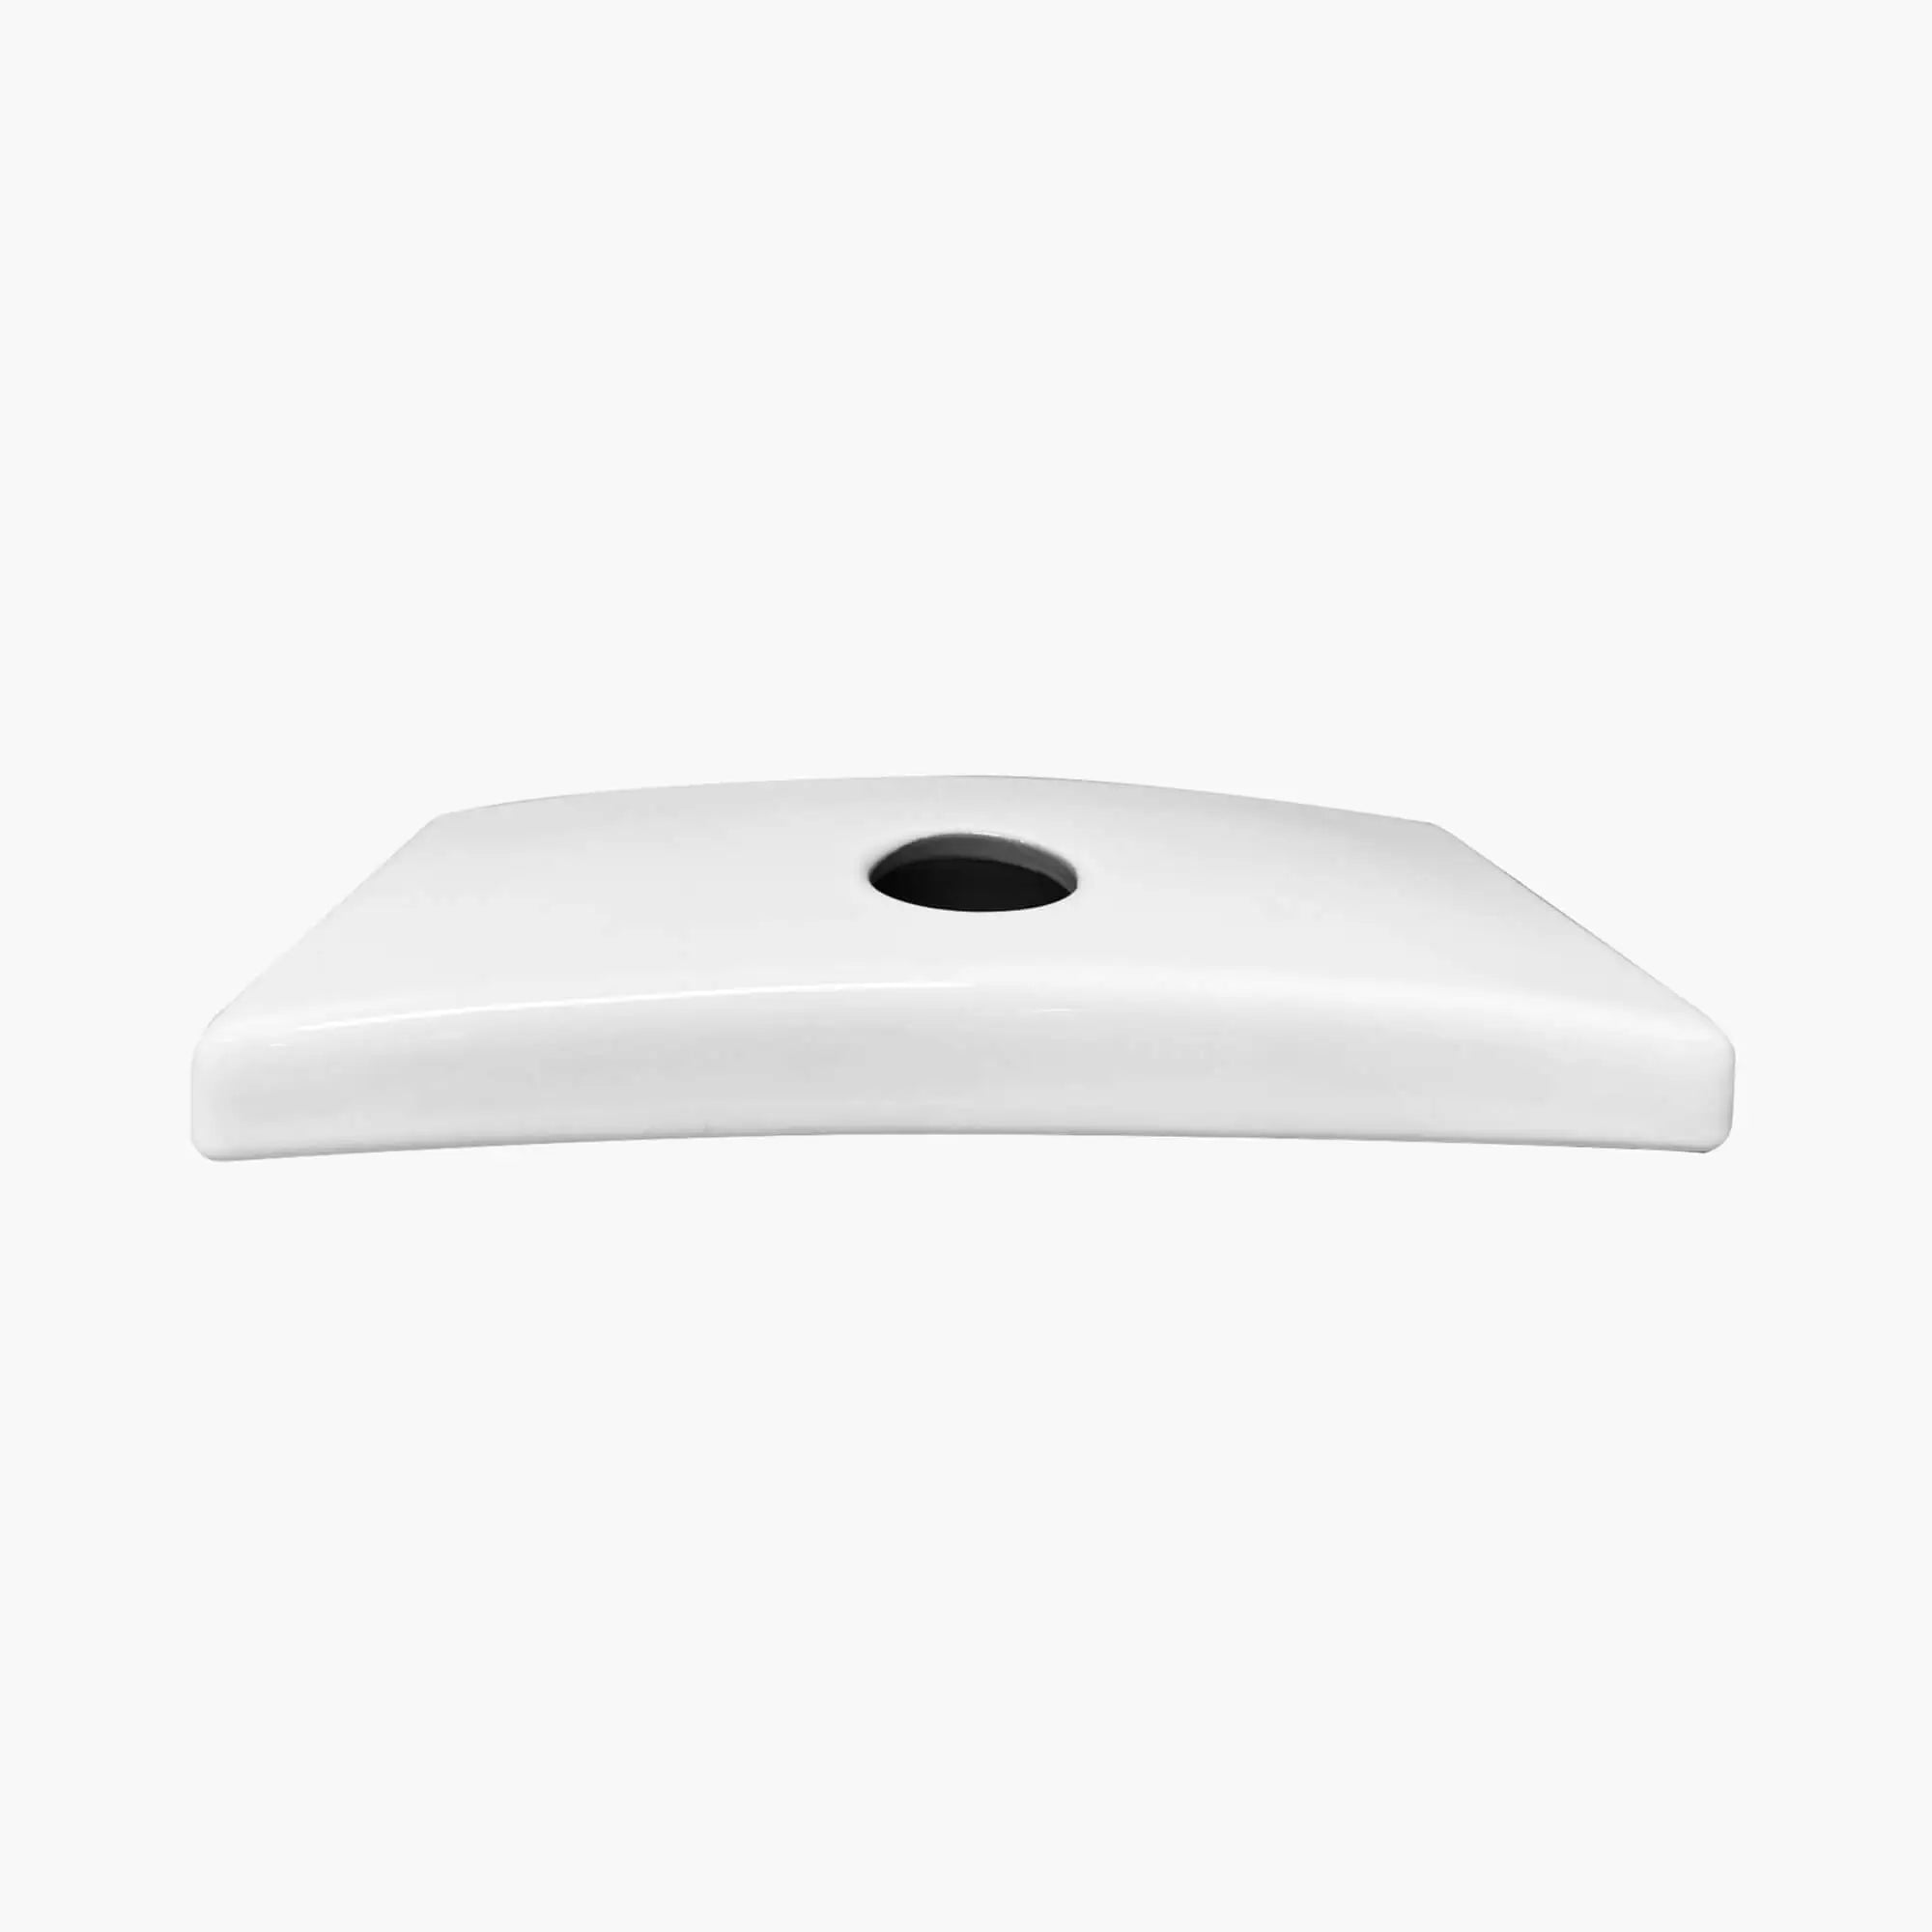 HOROW T0280W Toilet Tank Cover Replacement Model HWTL-80